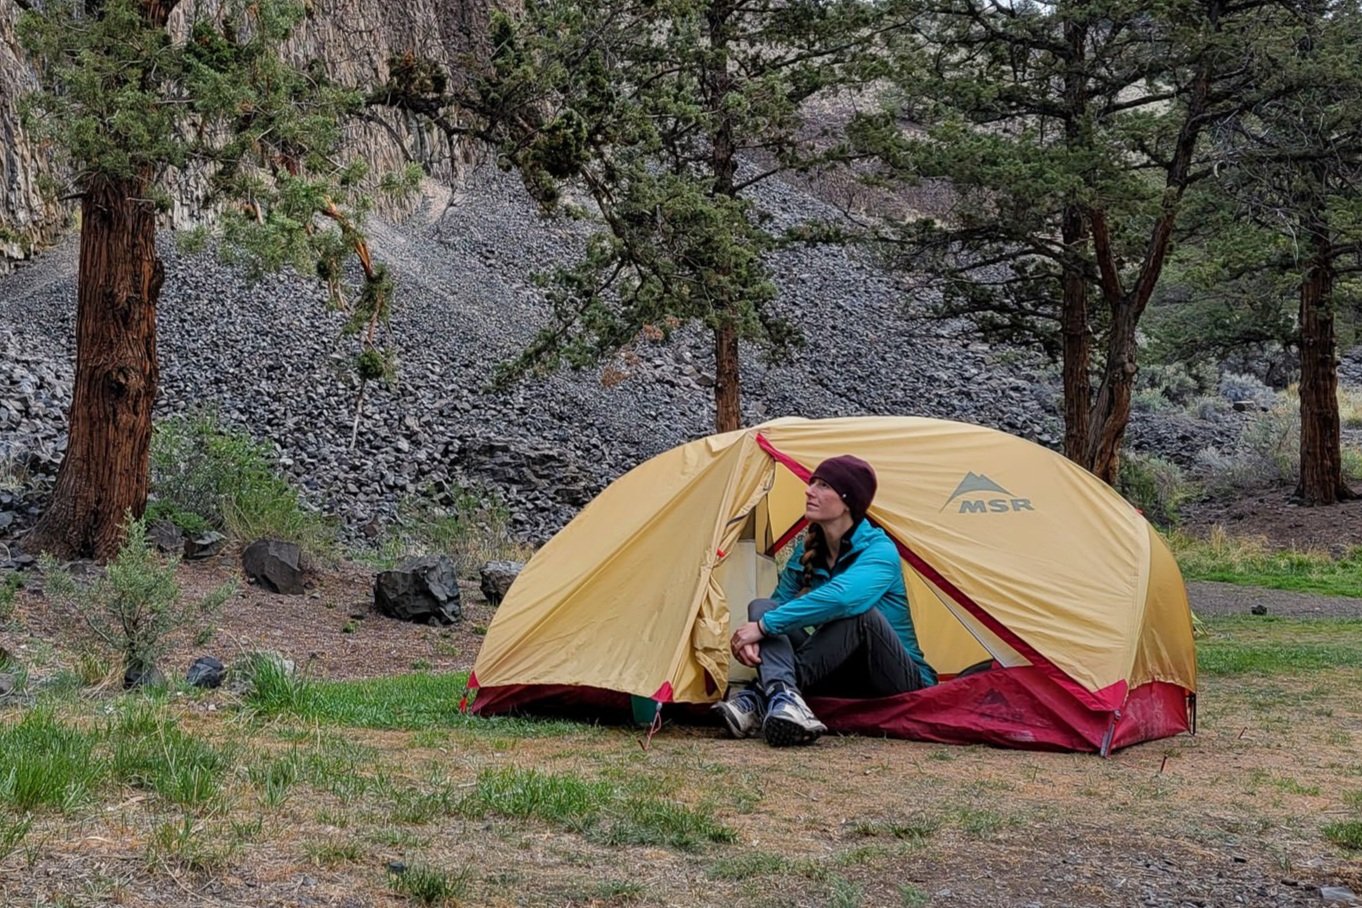 A hiker sitting in the doorway of the MSR Hubba Hubba 2 tent